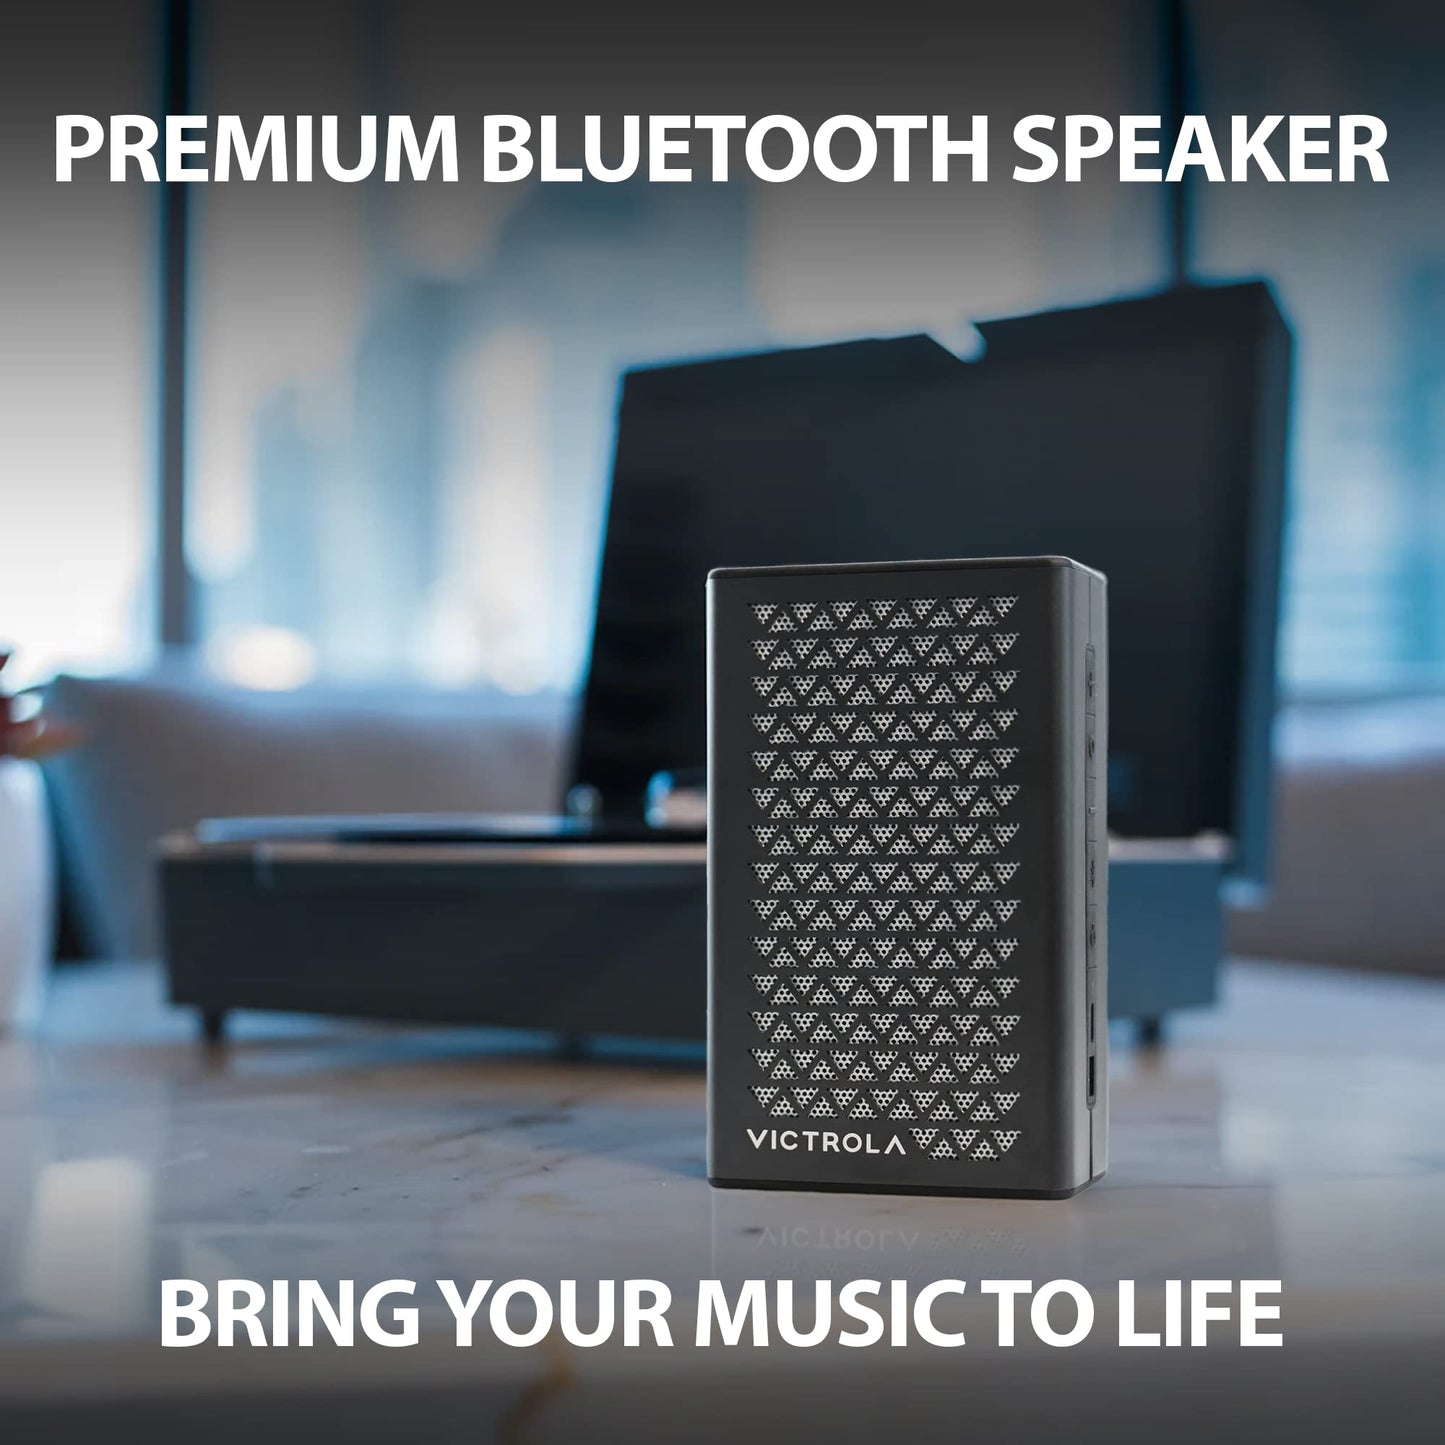 VICTROLA Music Edition 1 Portable Bluetooth Speaker, IP67 Water and Dust Resistant, 12 Hour Battery Life, Multi-Speaker Pairing, Premium Sound and Passive Bass Radiator, Black